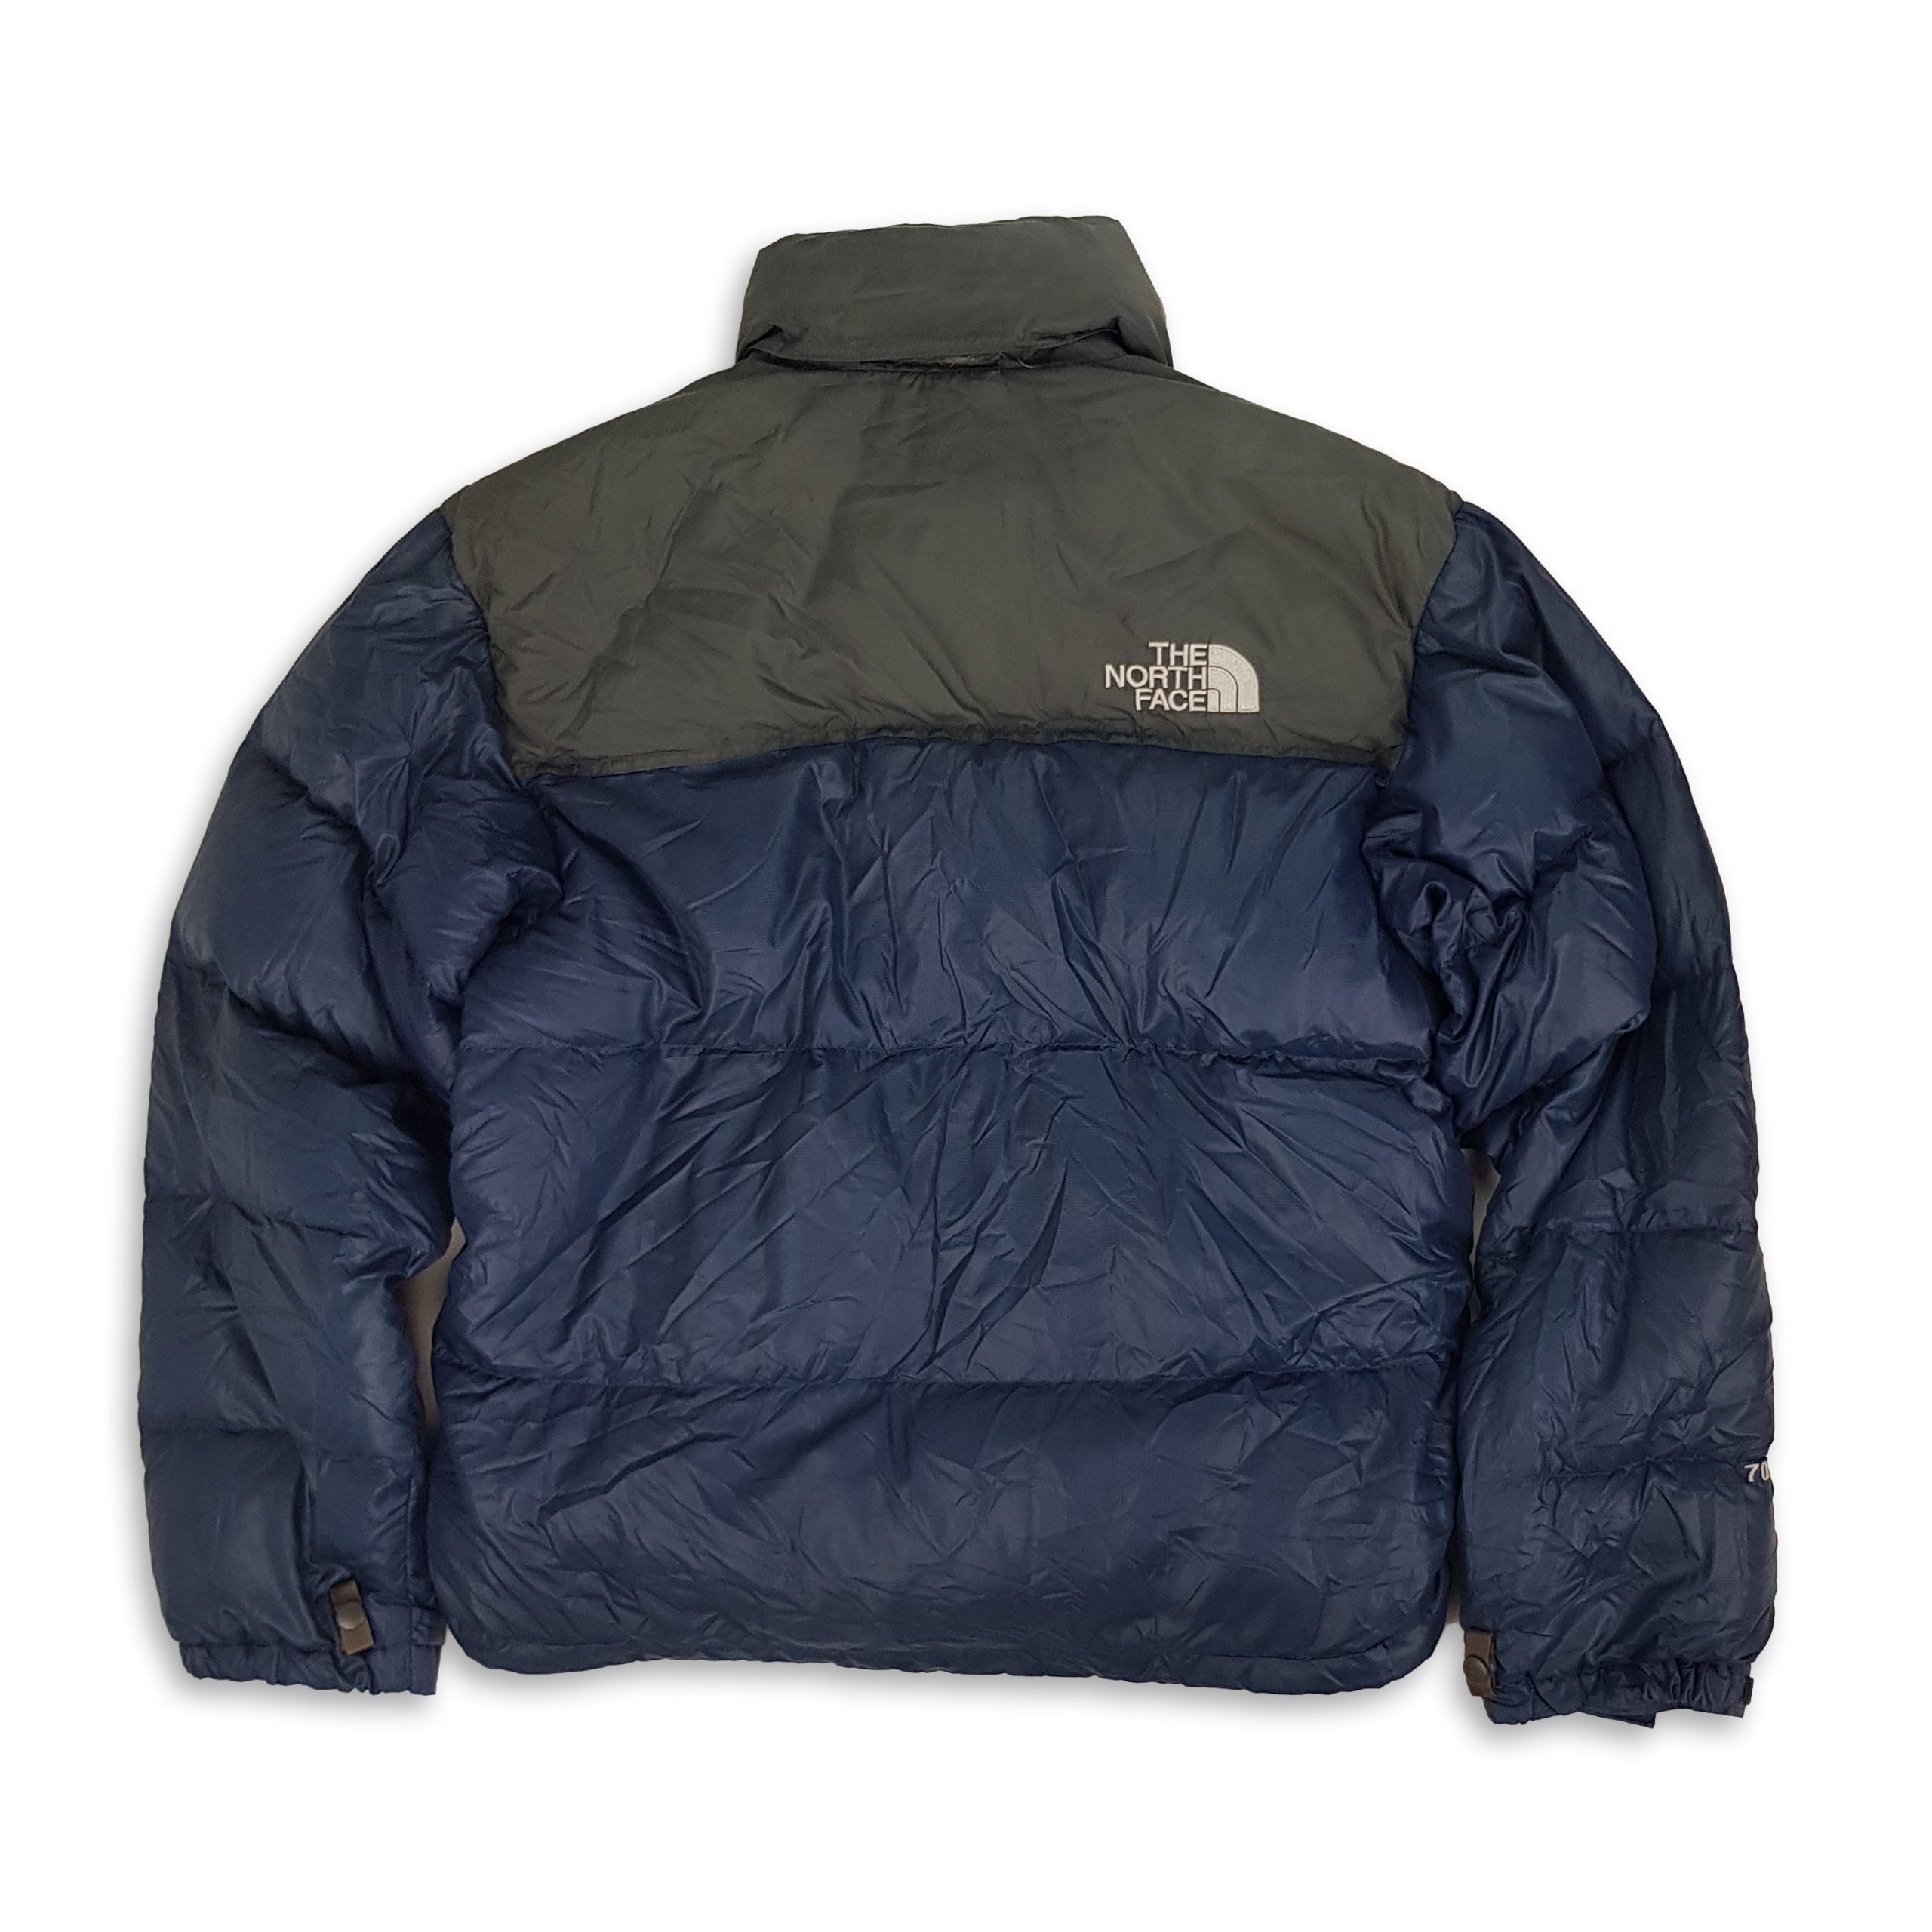 The North Face Puffer 700 - Authenticated Luxury Designer